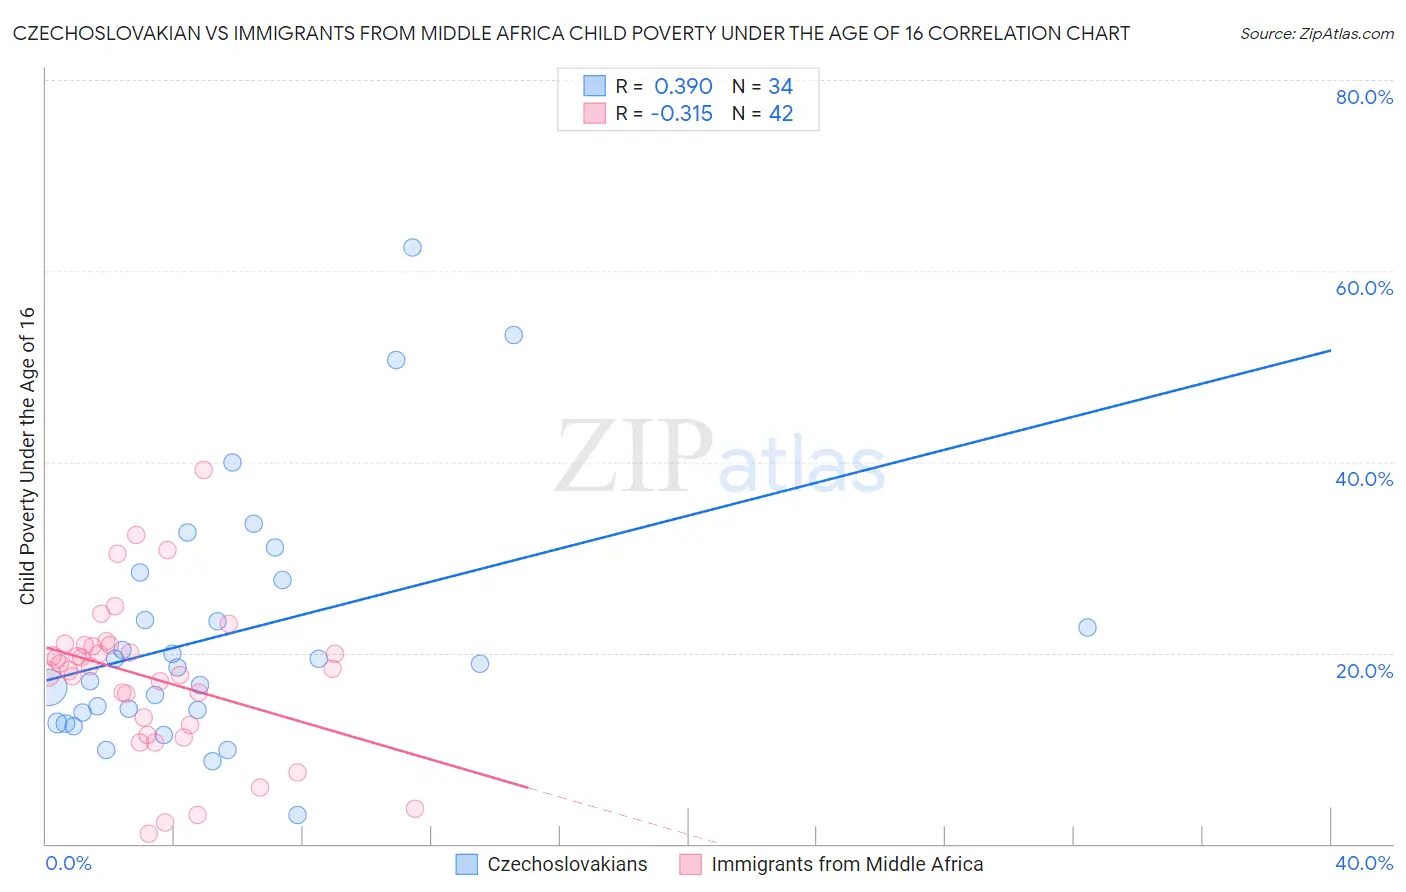 Czechoslovakian vs Immigrants from Middle Africa Child Poverty Under the Age of 16